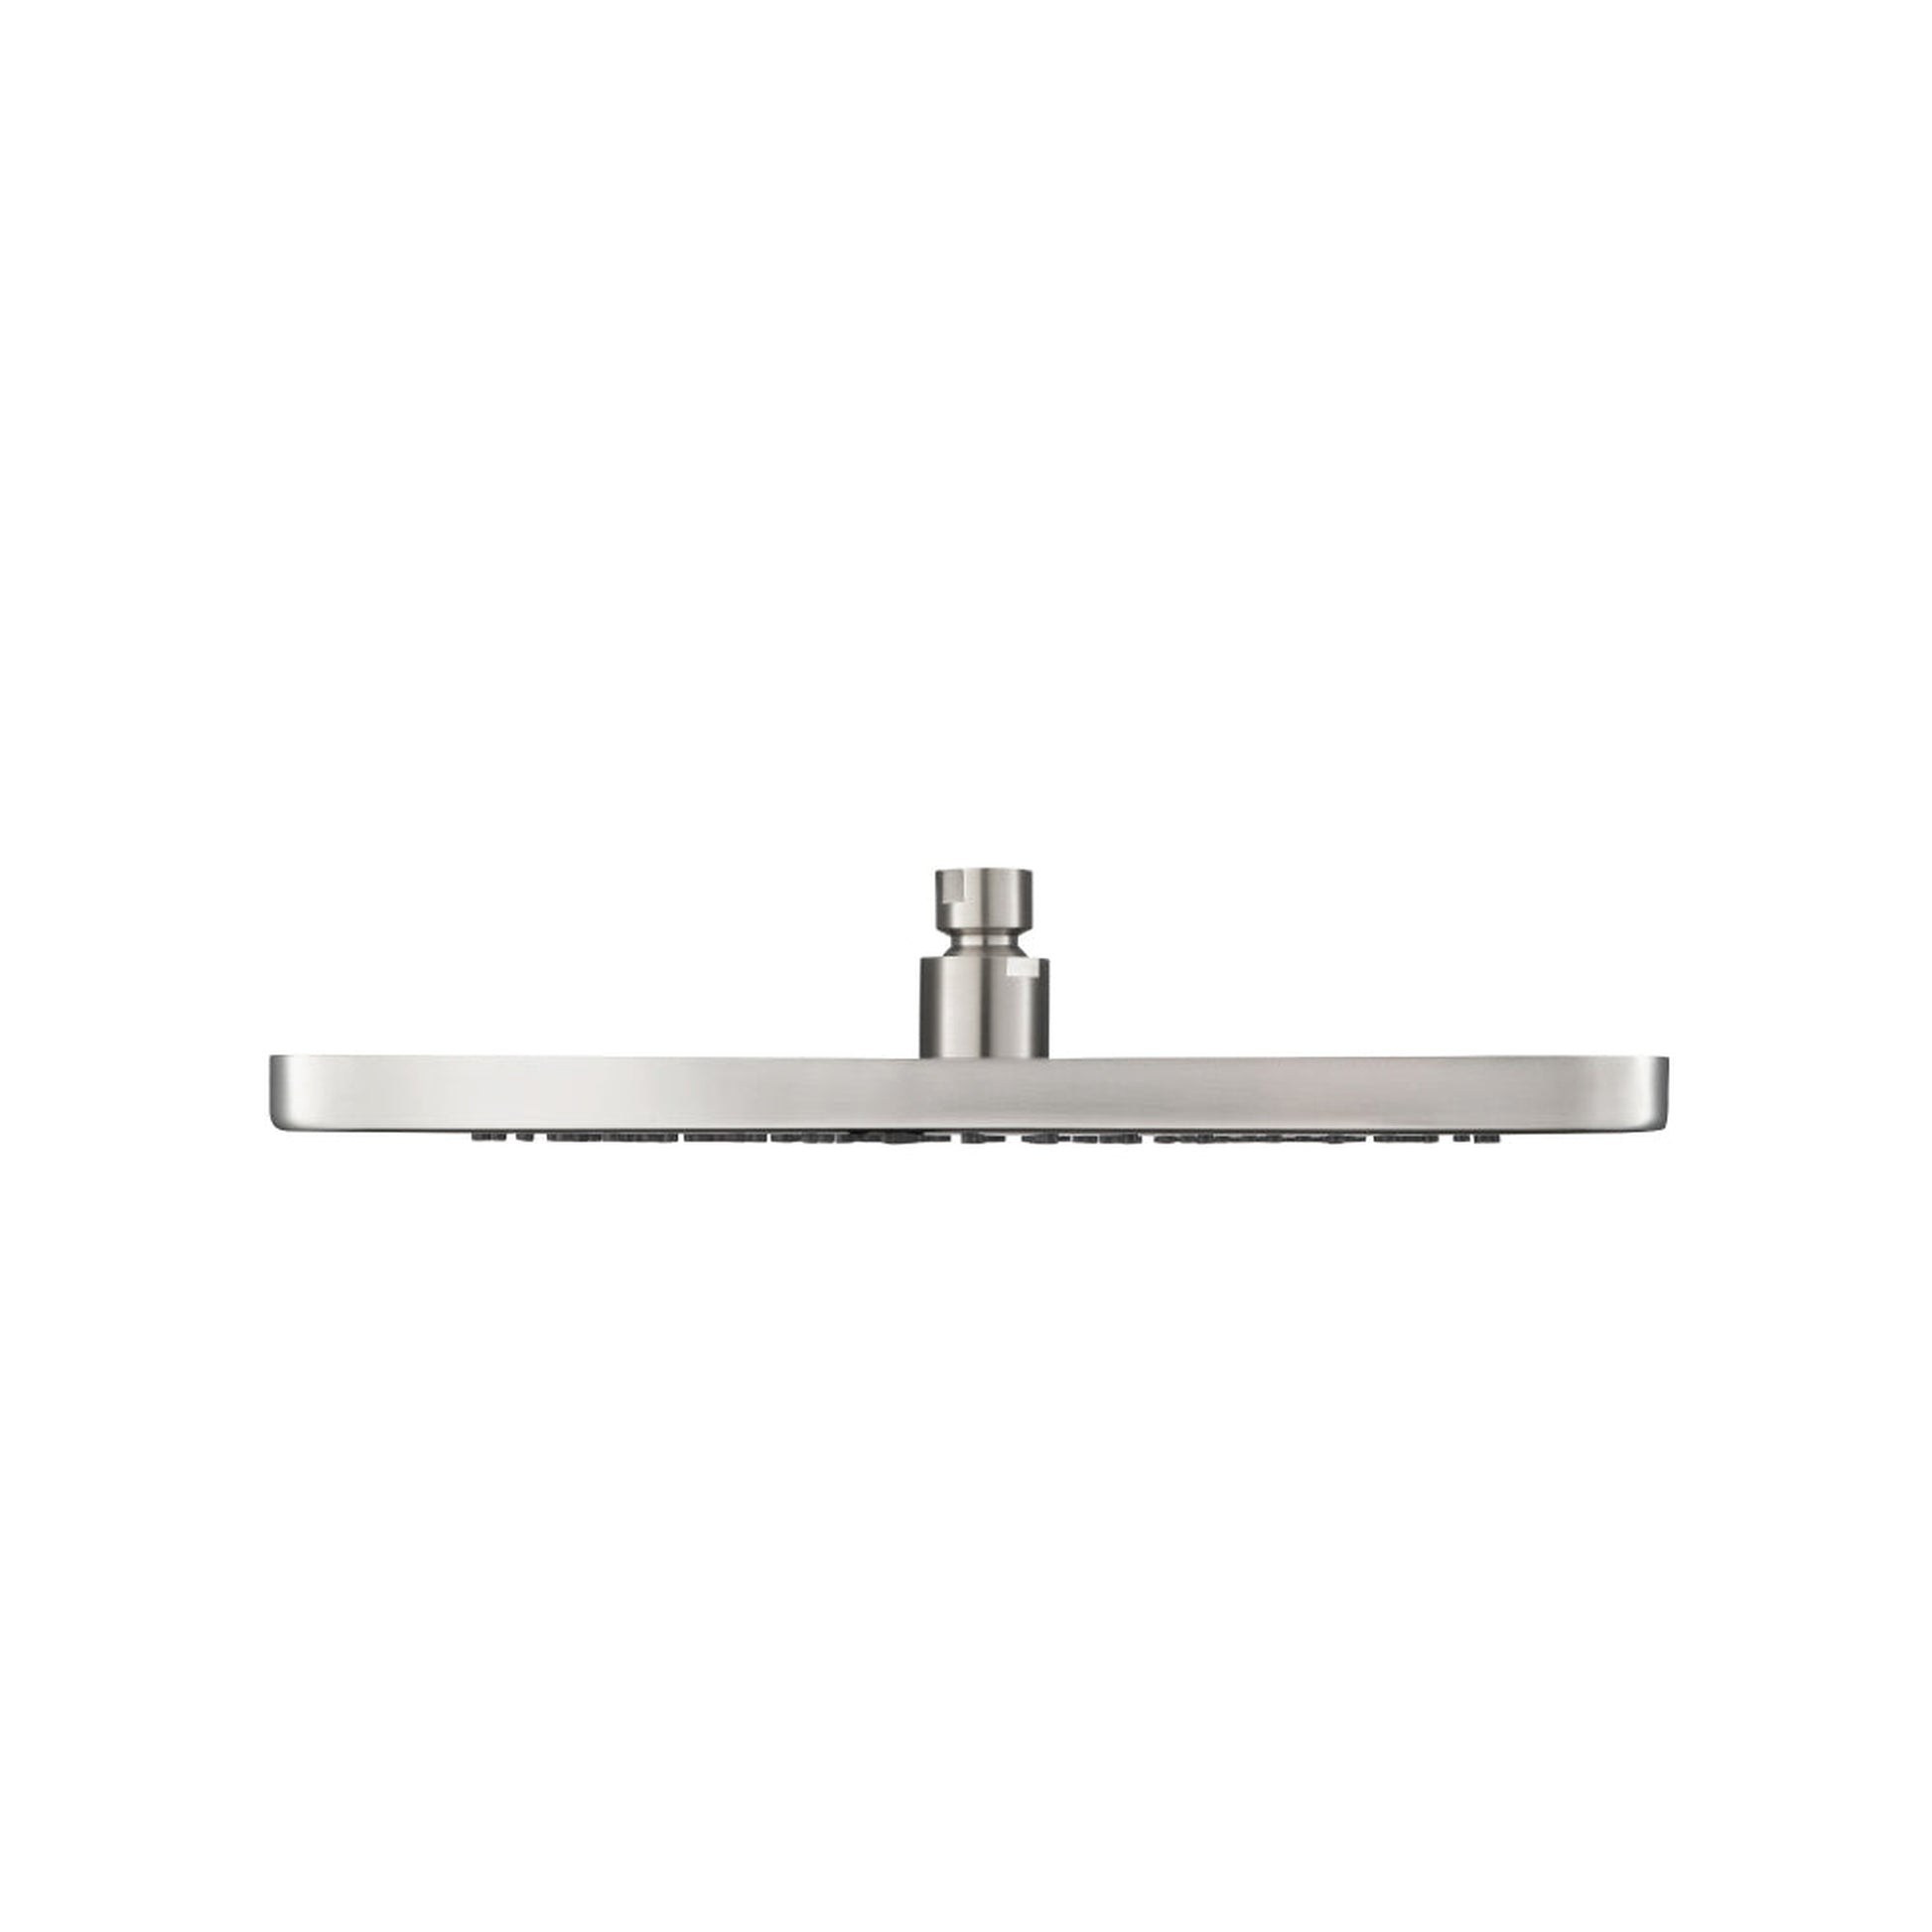 Isenberg Universal Fixtures 12" Single Function Square Curve-Edged Brushed Nickel PVD Solid Brass Rain Shower Head With 16" Wall Mounted Shower Arm